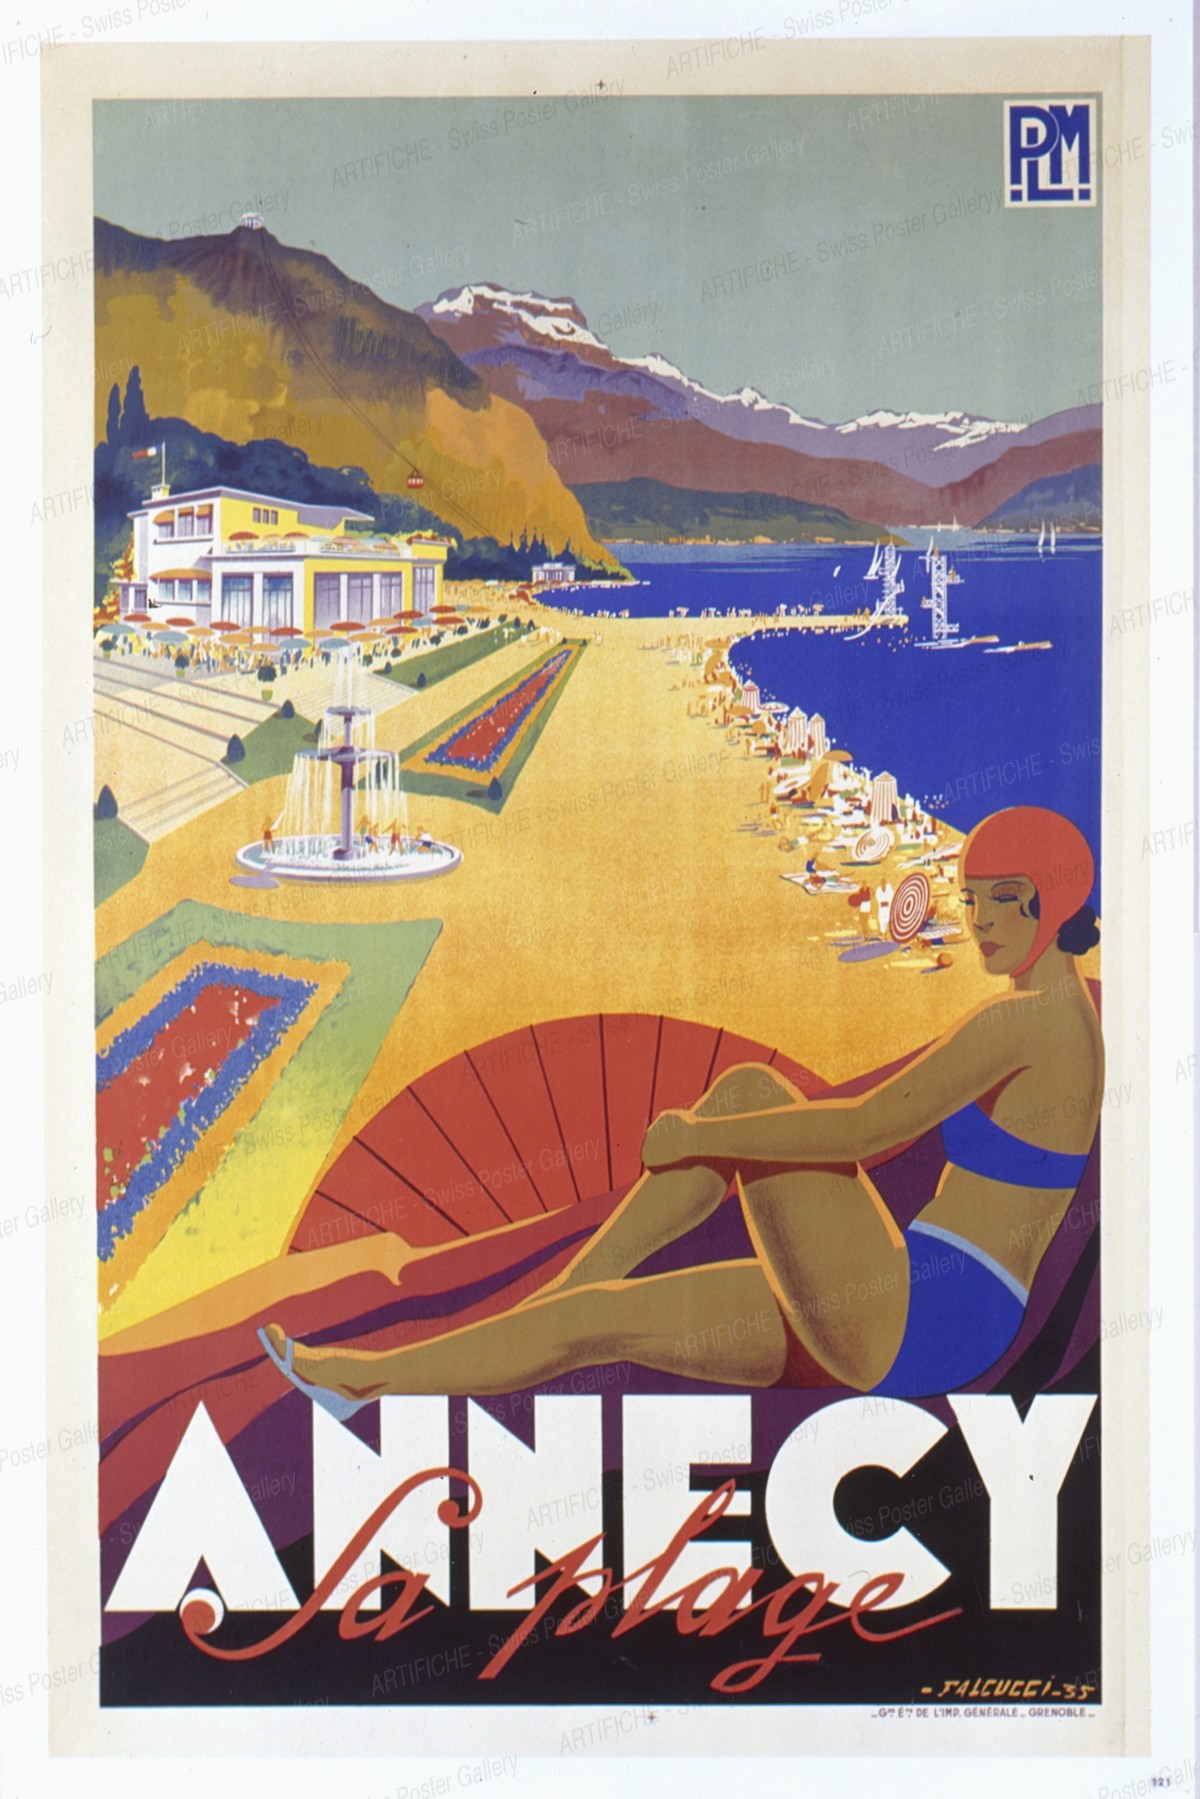 Annecy Plage, Roger Falcucci